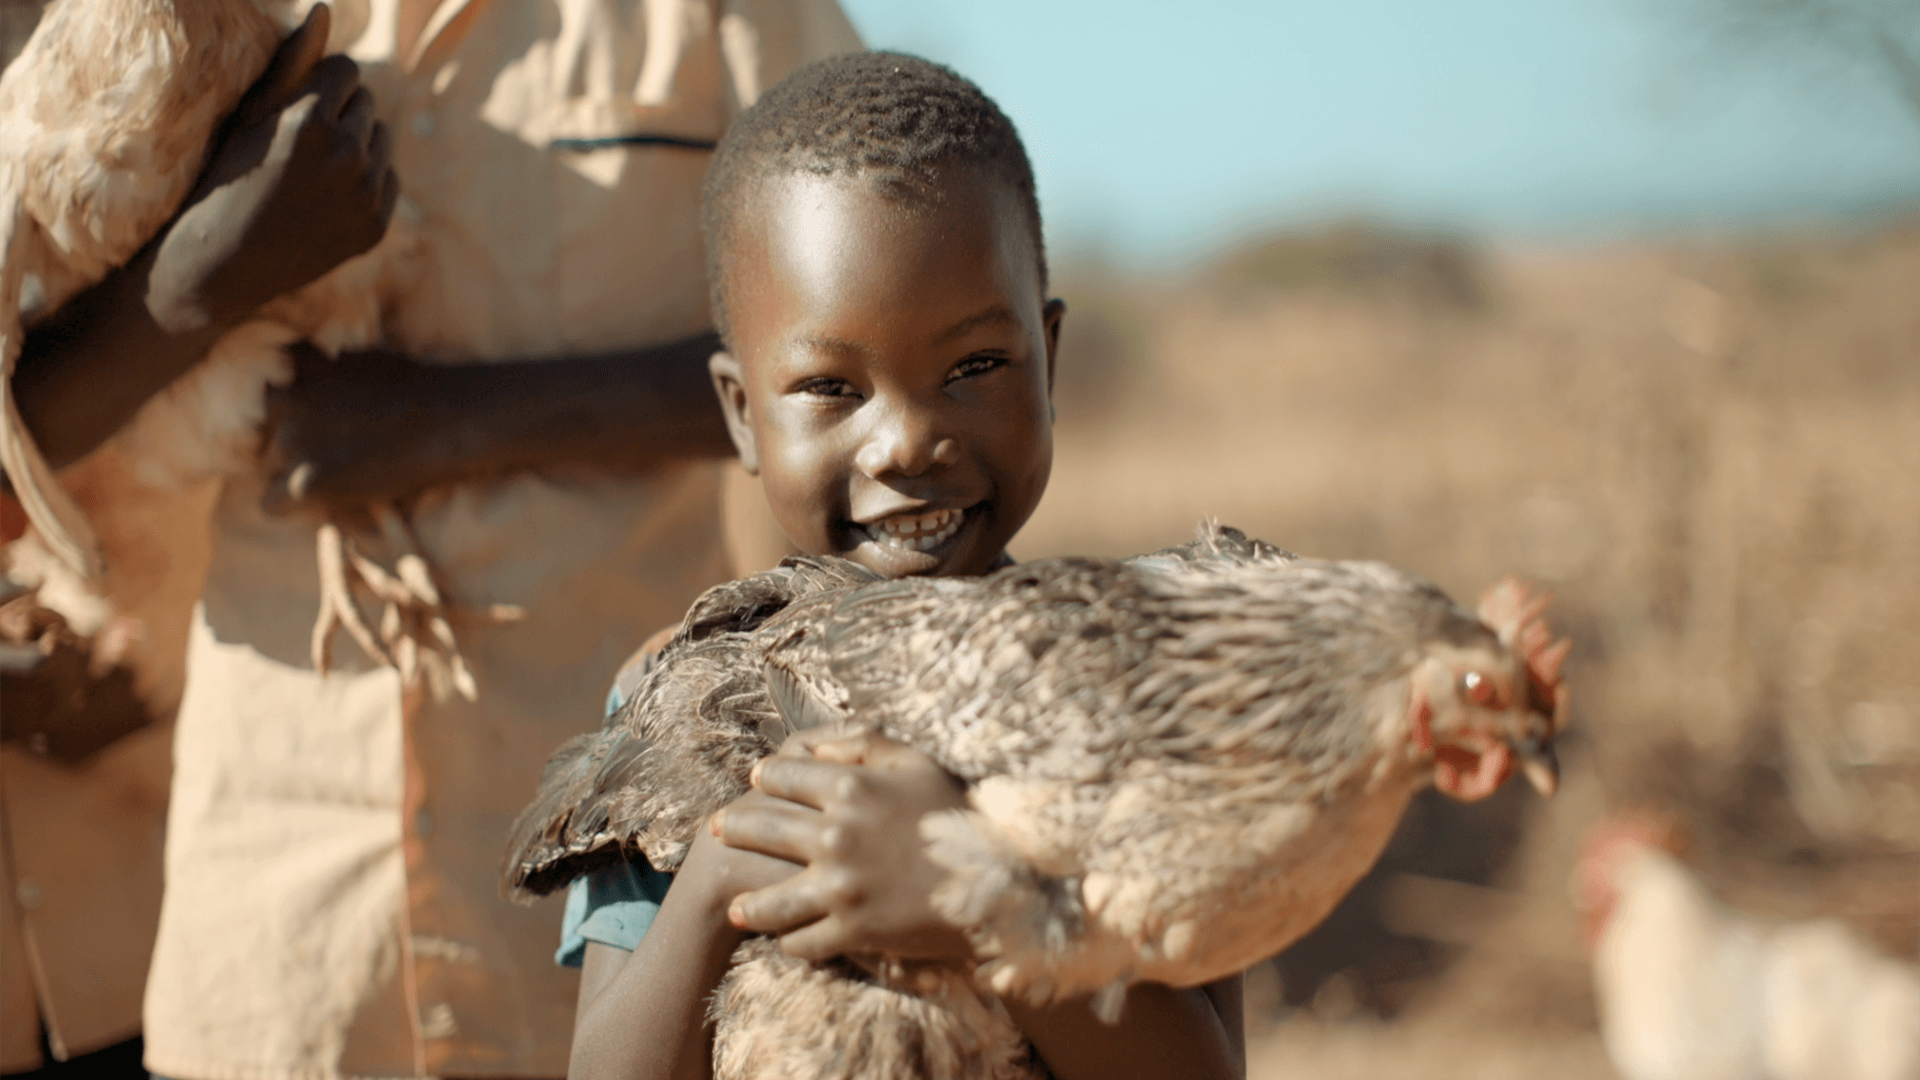 Still from the VANDAL produced World Vision commercial featuring a young boy holding a chicken